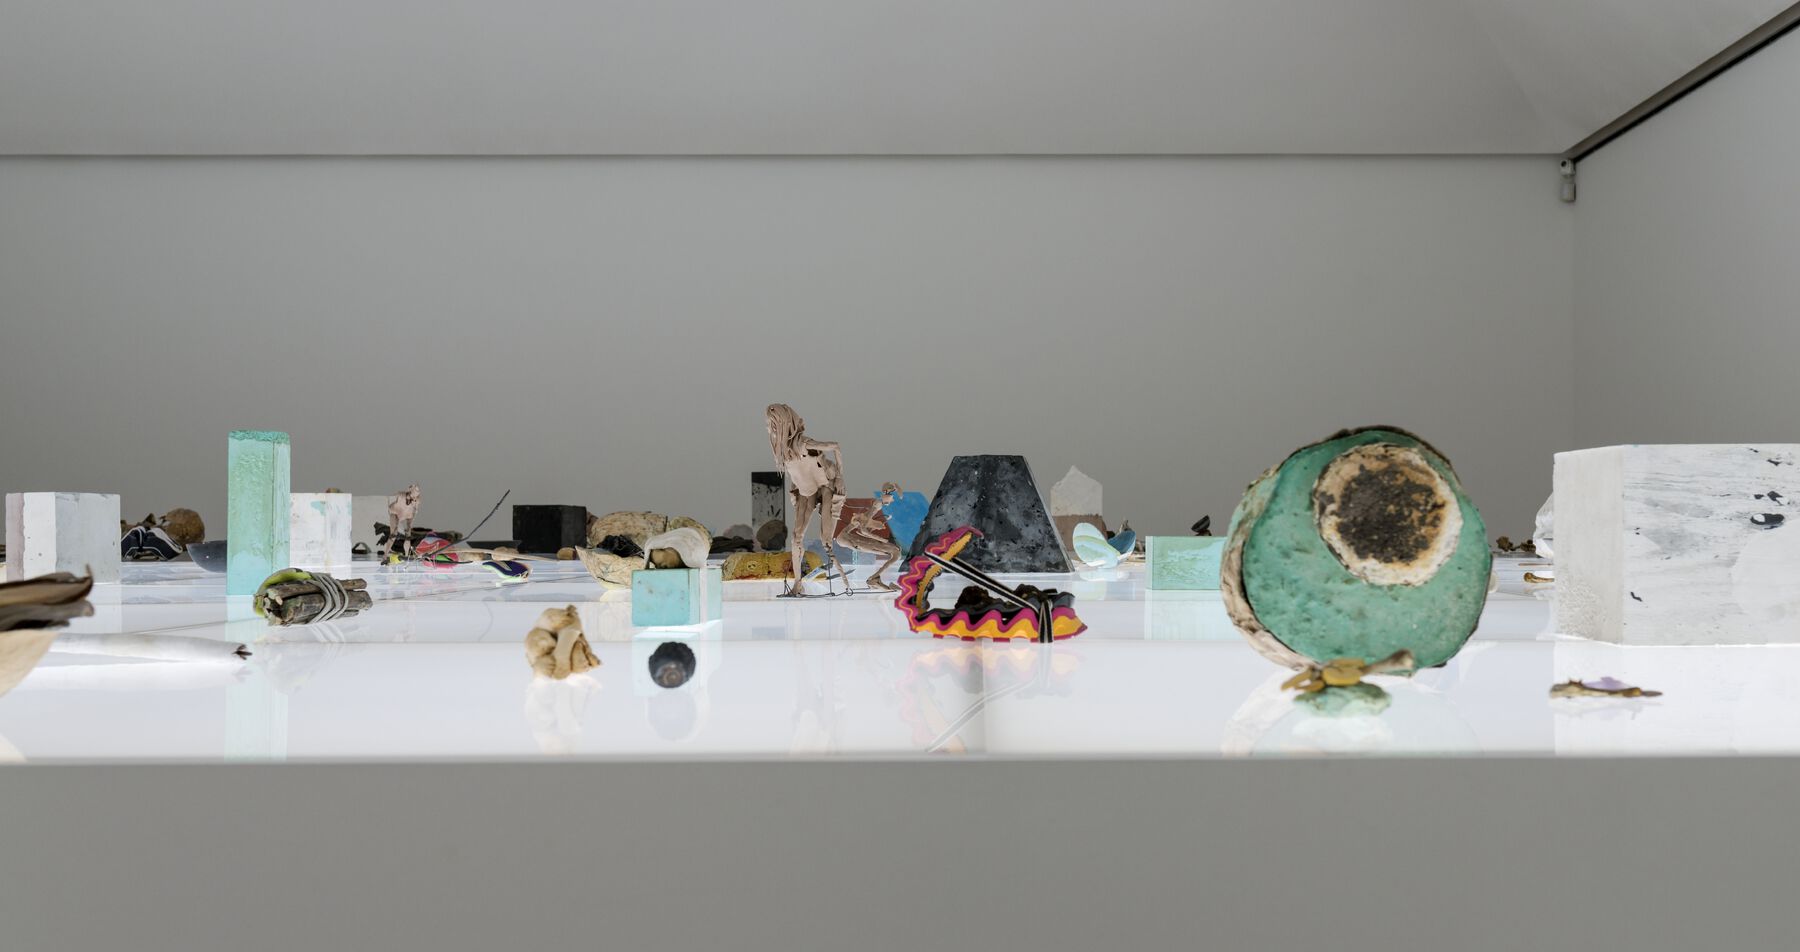 Assorted objects, including a geode, figurative sculptures, glass blocks, placed on a bright white surface